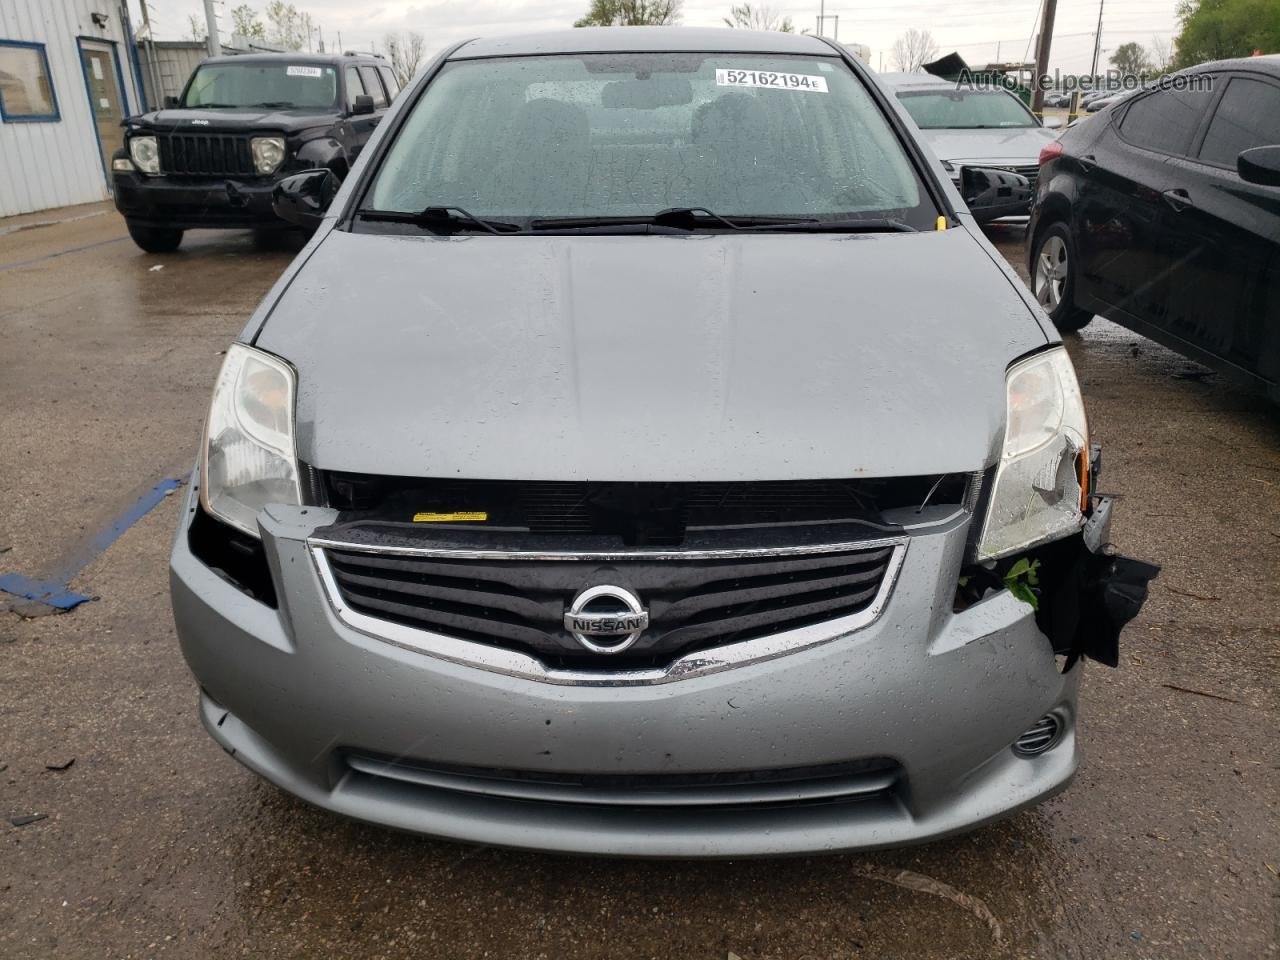 2012 Nissan Sentra 2.0 Gray vin: 3N1AB6APXCL769080